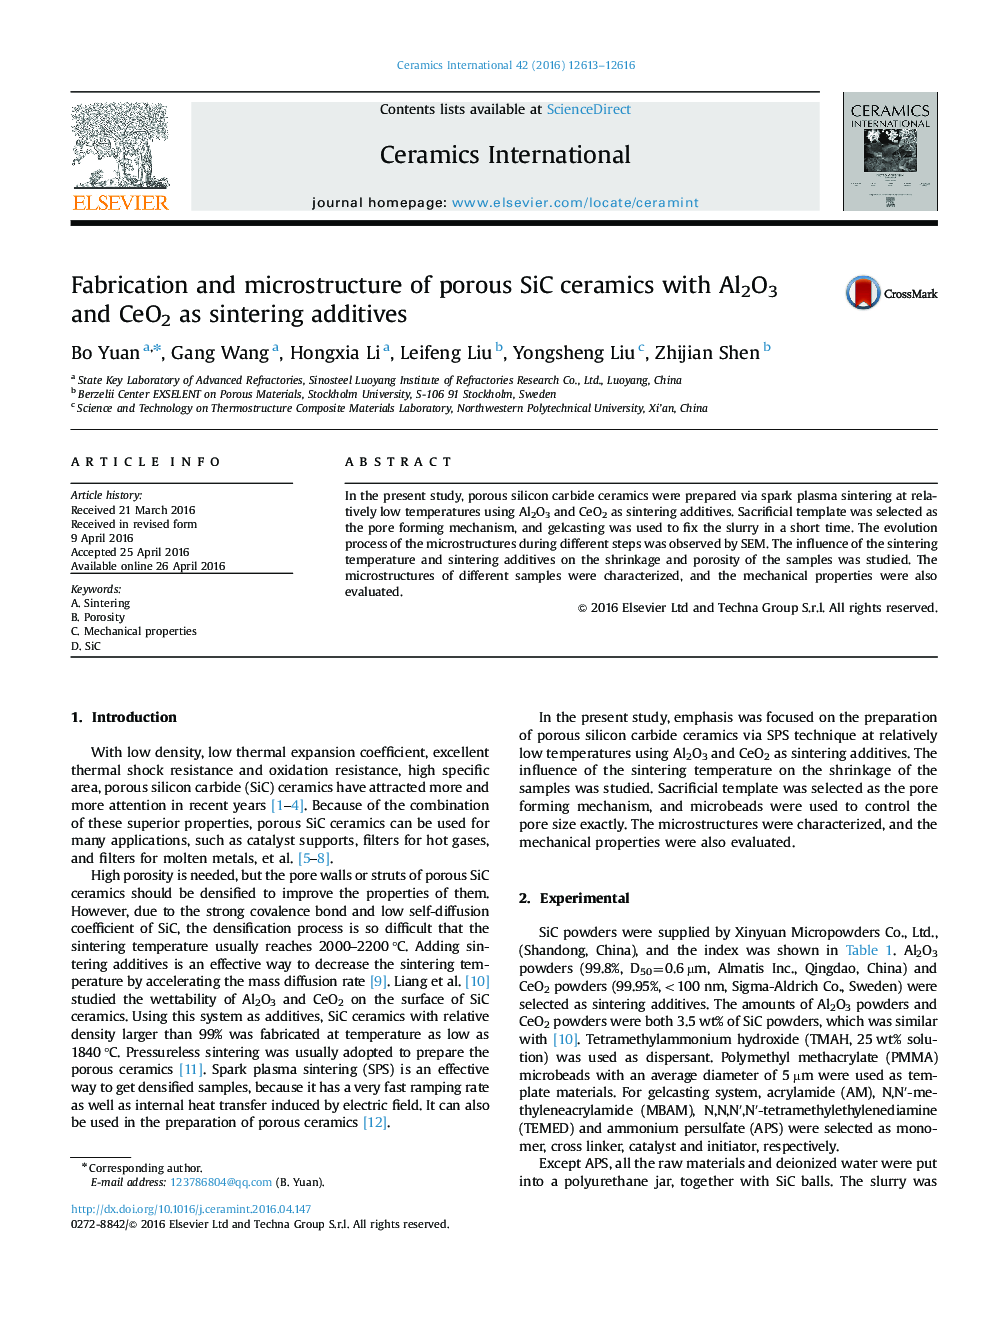 Fabrication and microstructure of porous SiC ceramics with Al2O3 and CeO2 as sintering additives